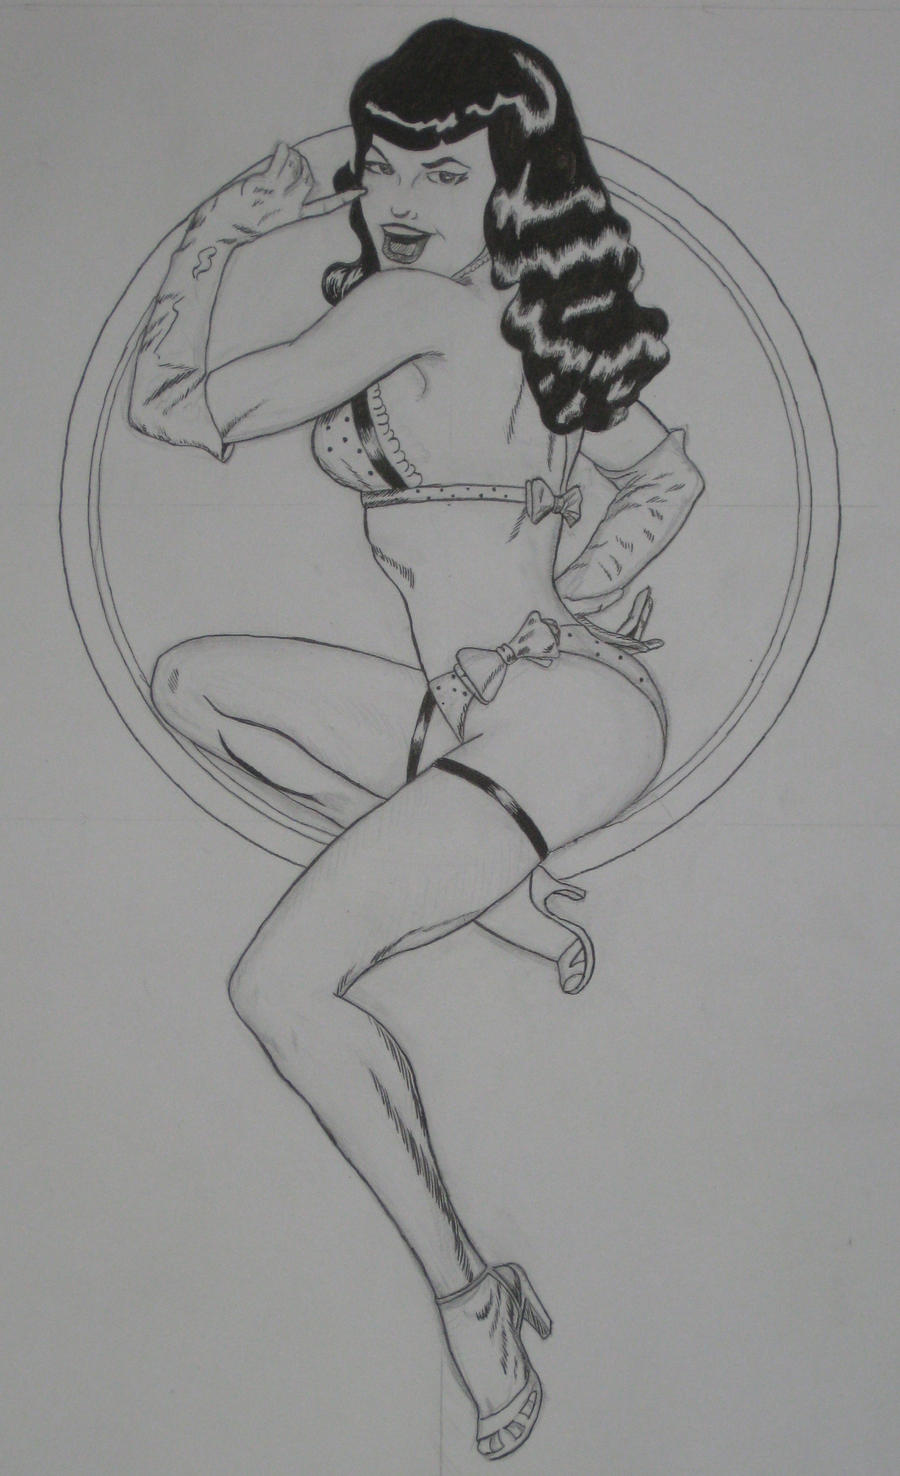 Bettie Page by Thumpasaurus